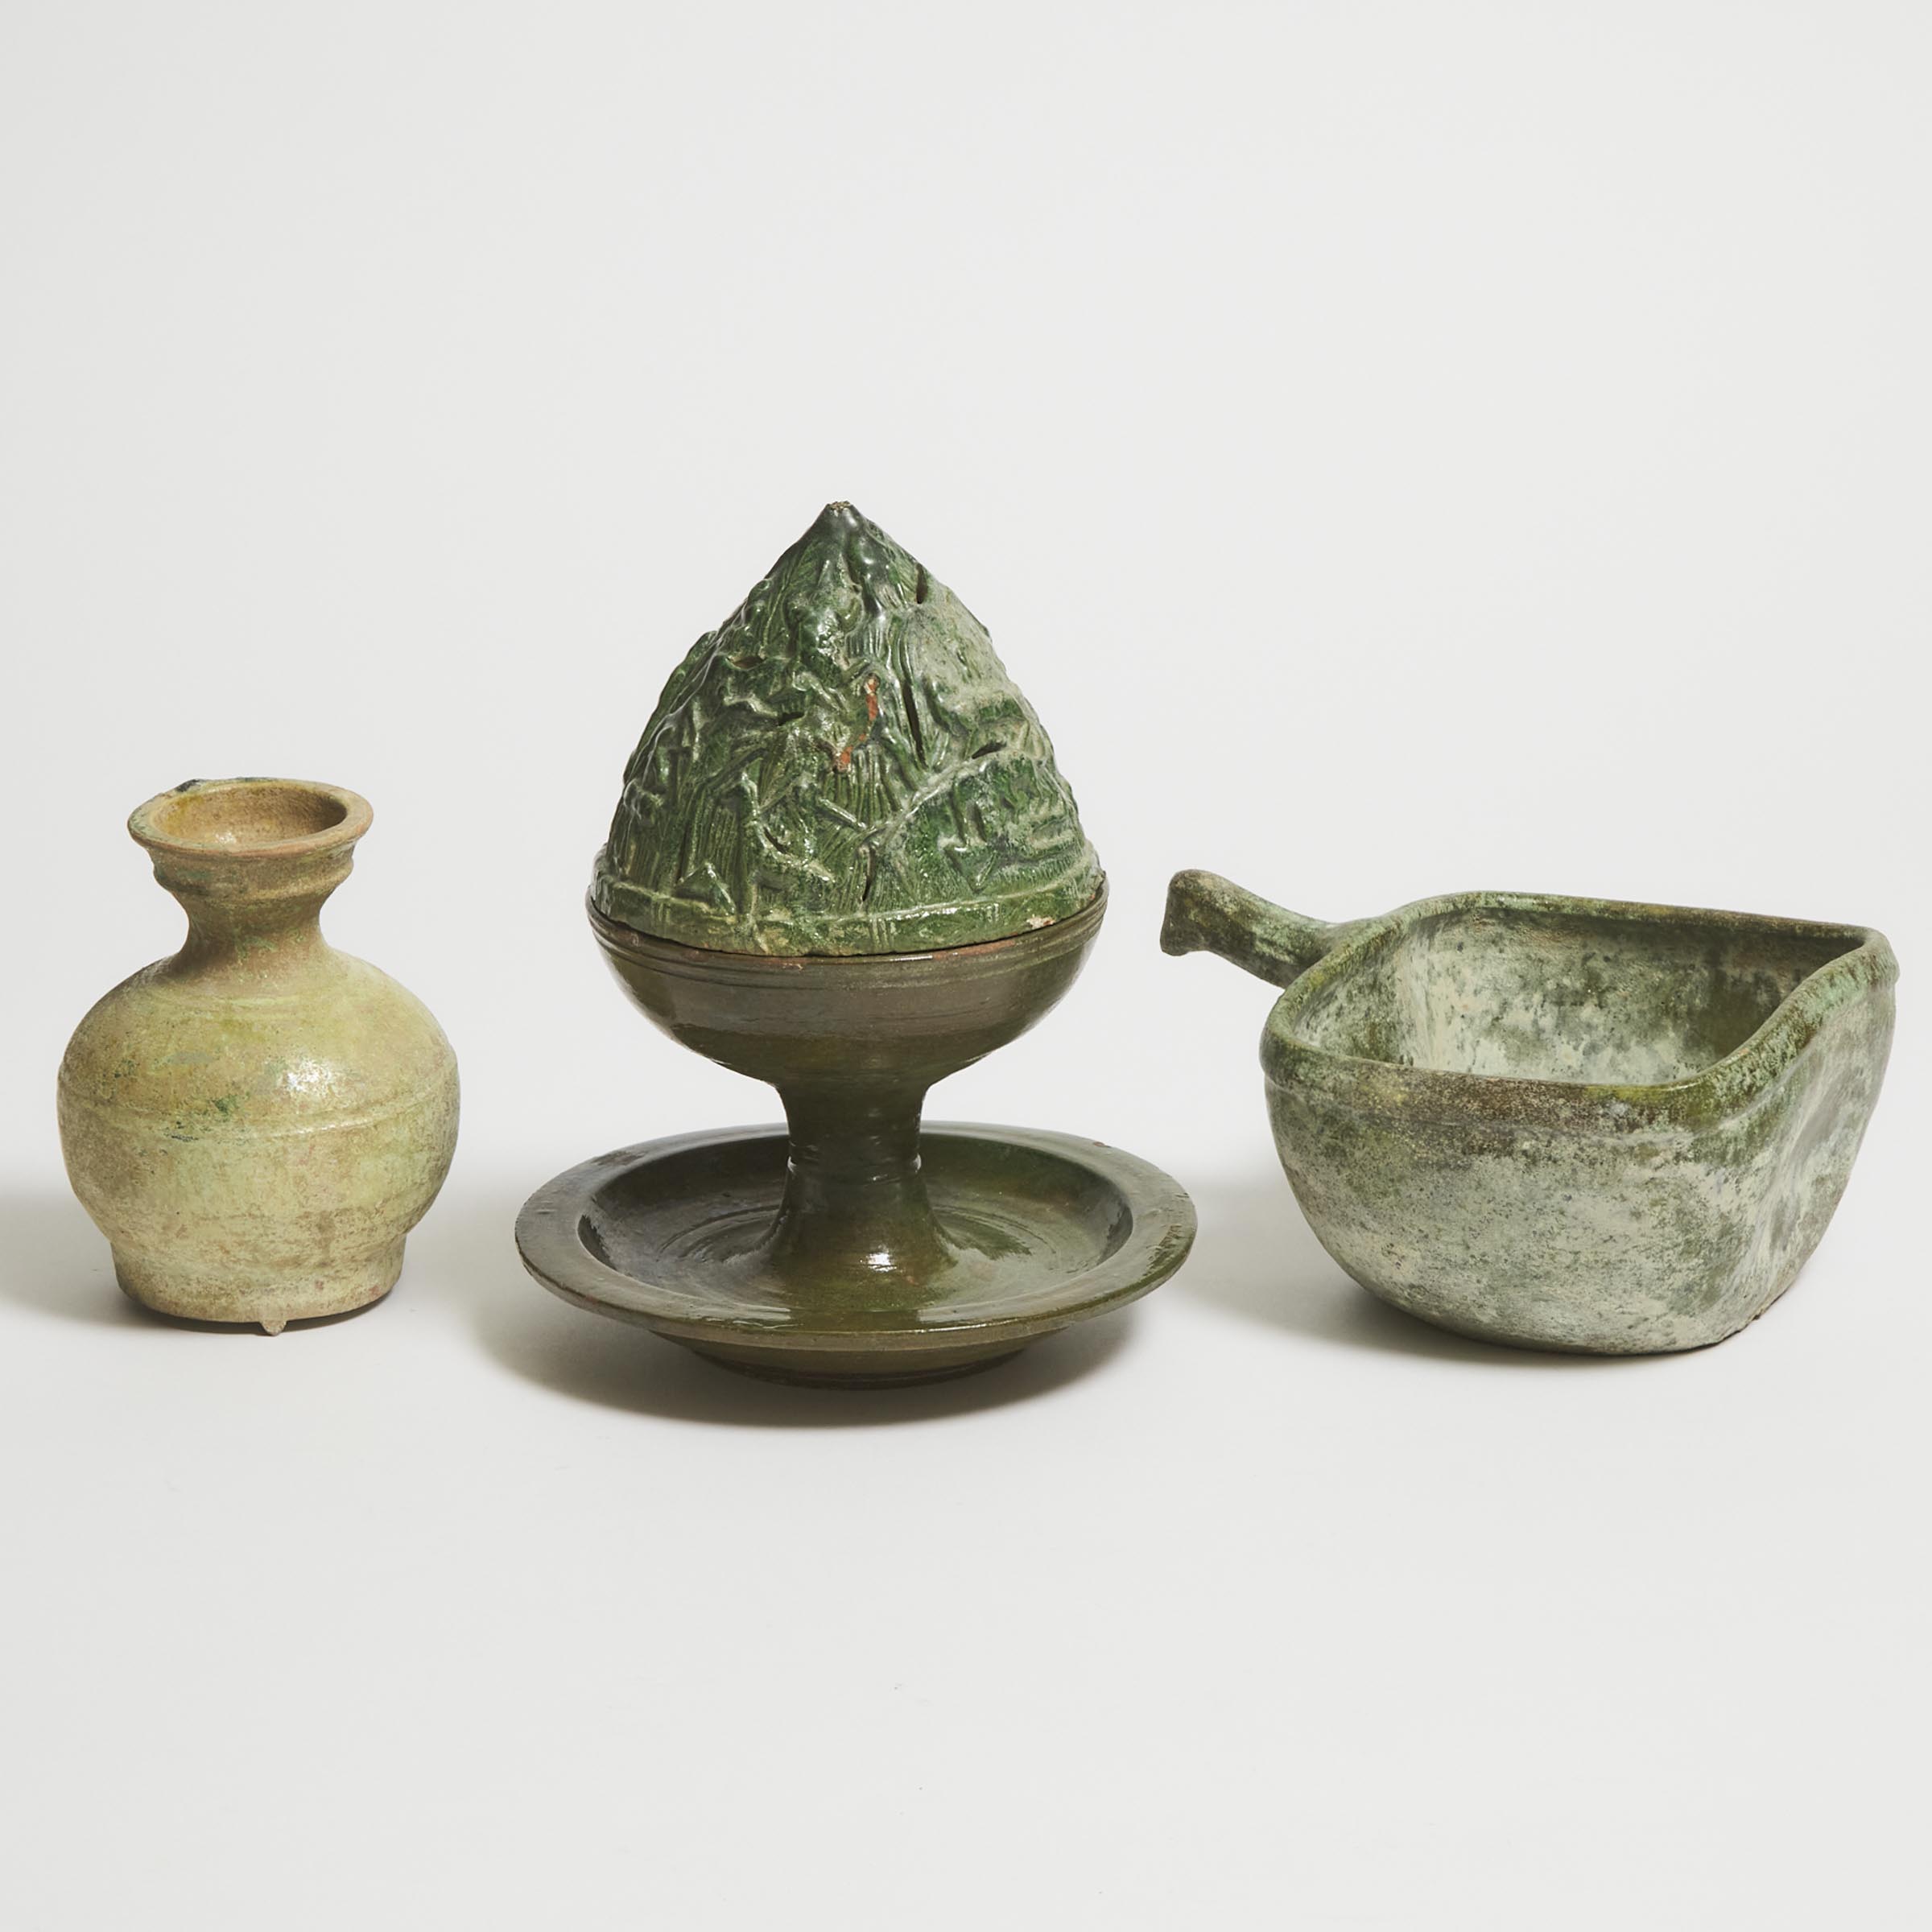 A Group of Three Green-Glazed Pottery Vessels, Han Dynasty (206 BC-AD 220)